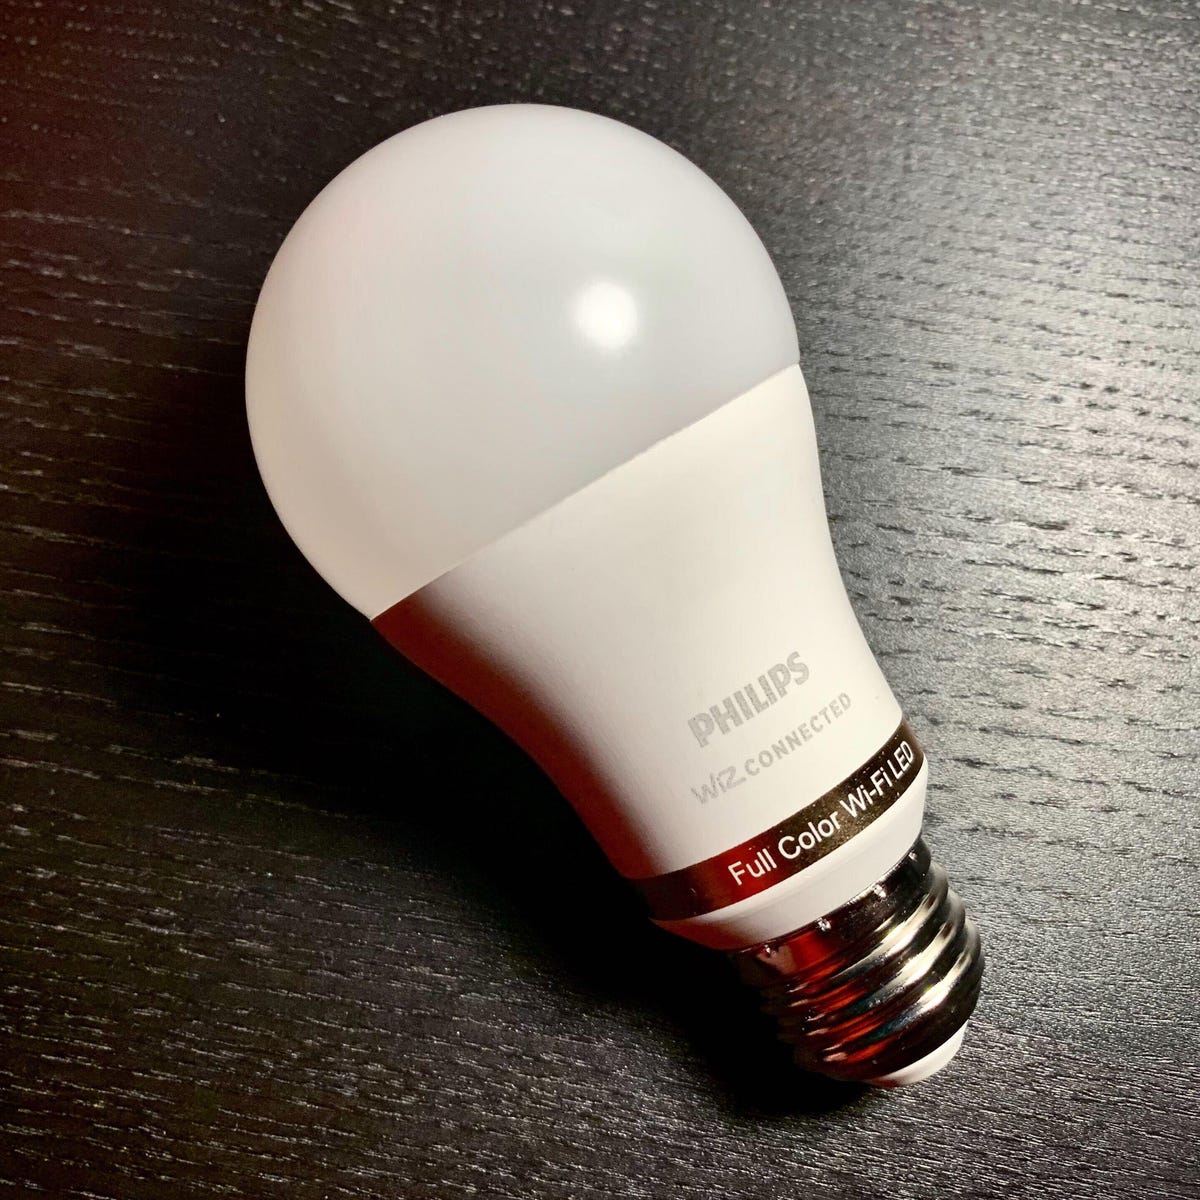 At bidrage Mose feudale Philips Wiz Connected LED review: This color-changing smart bulb isn't  stupidly expensive - CNET